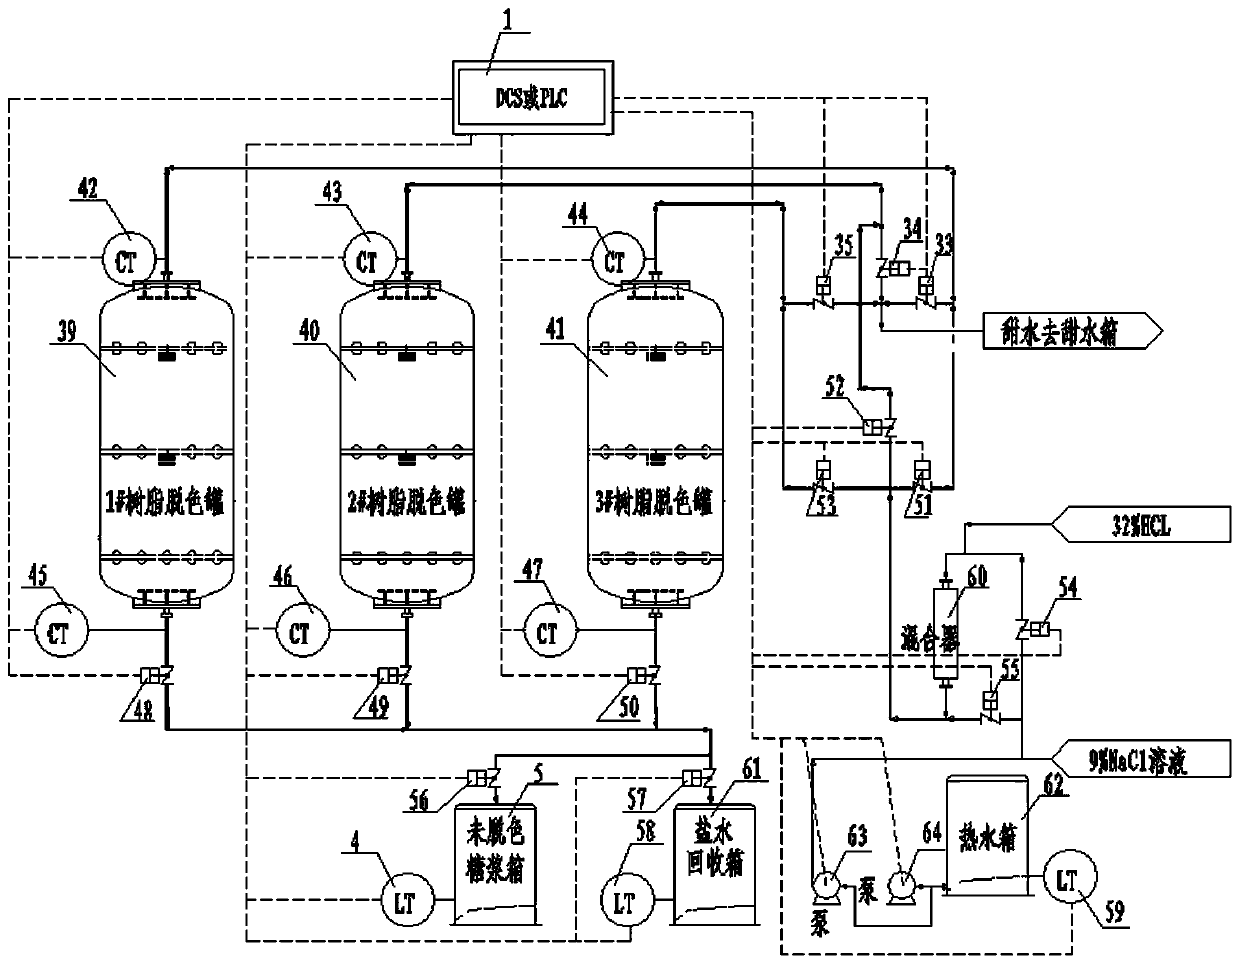 Intelligent control system for refined sugar resin decolorization and regeneration